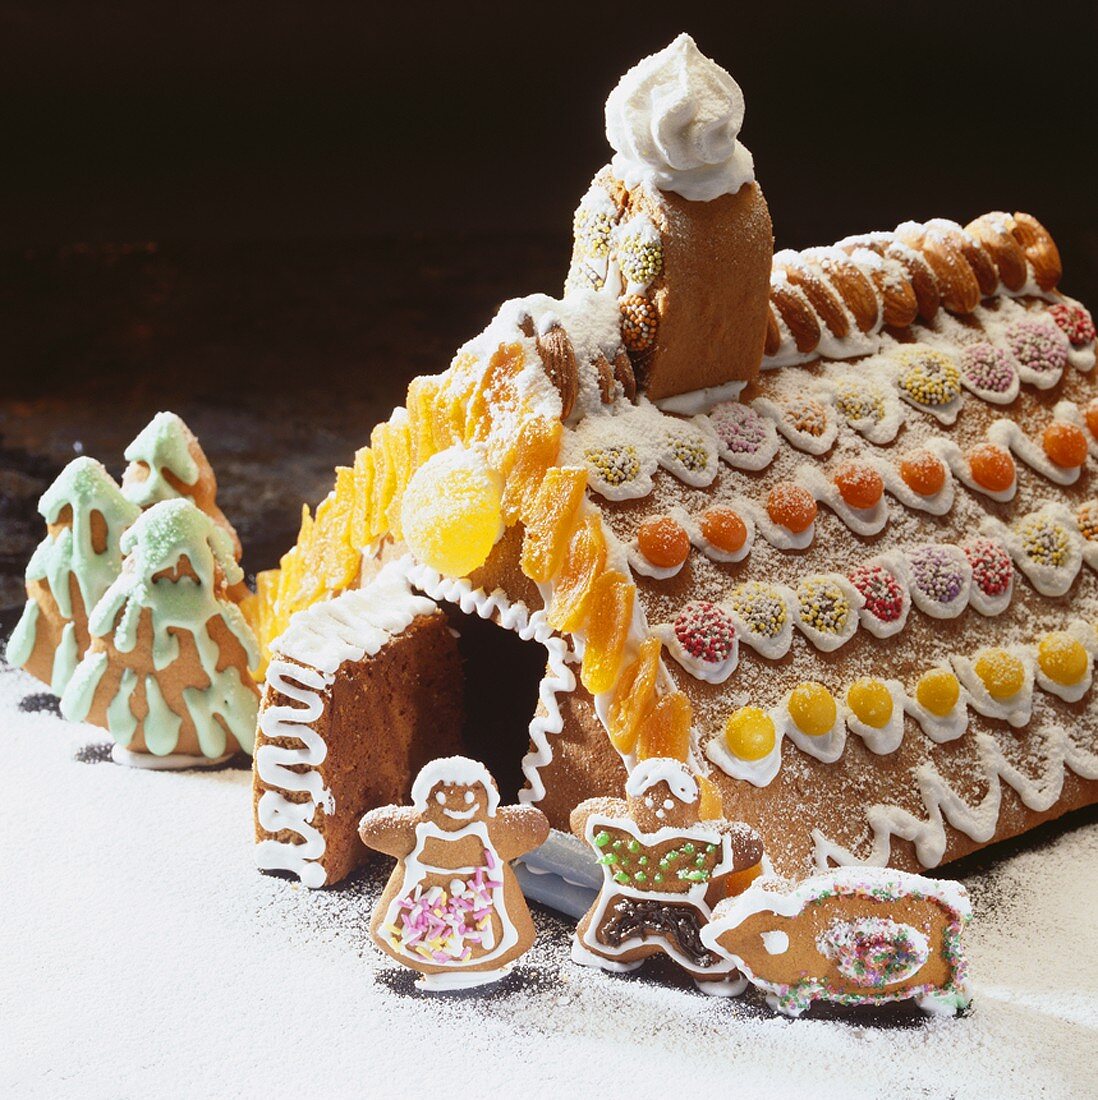 Gingerbread house and small gingerbread figures